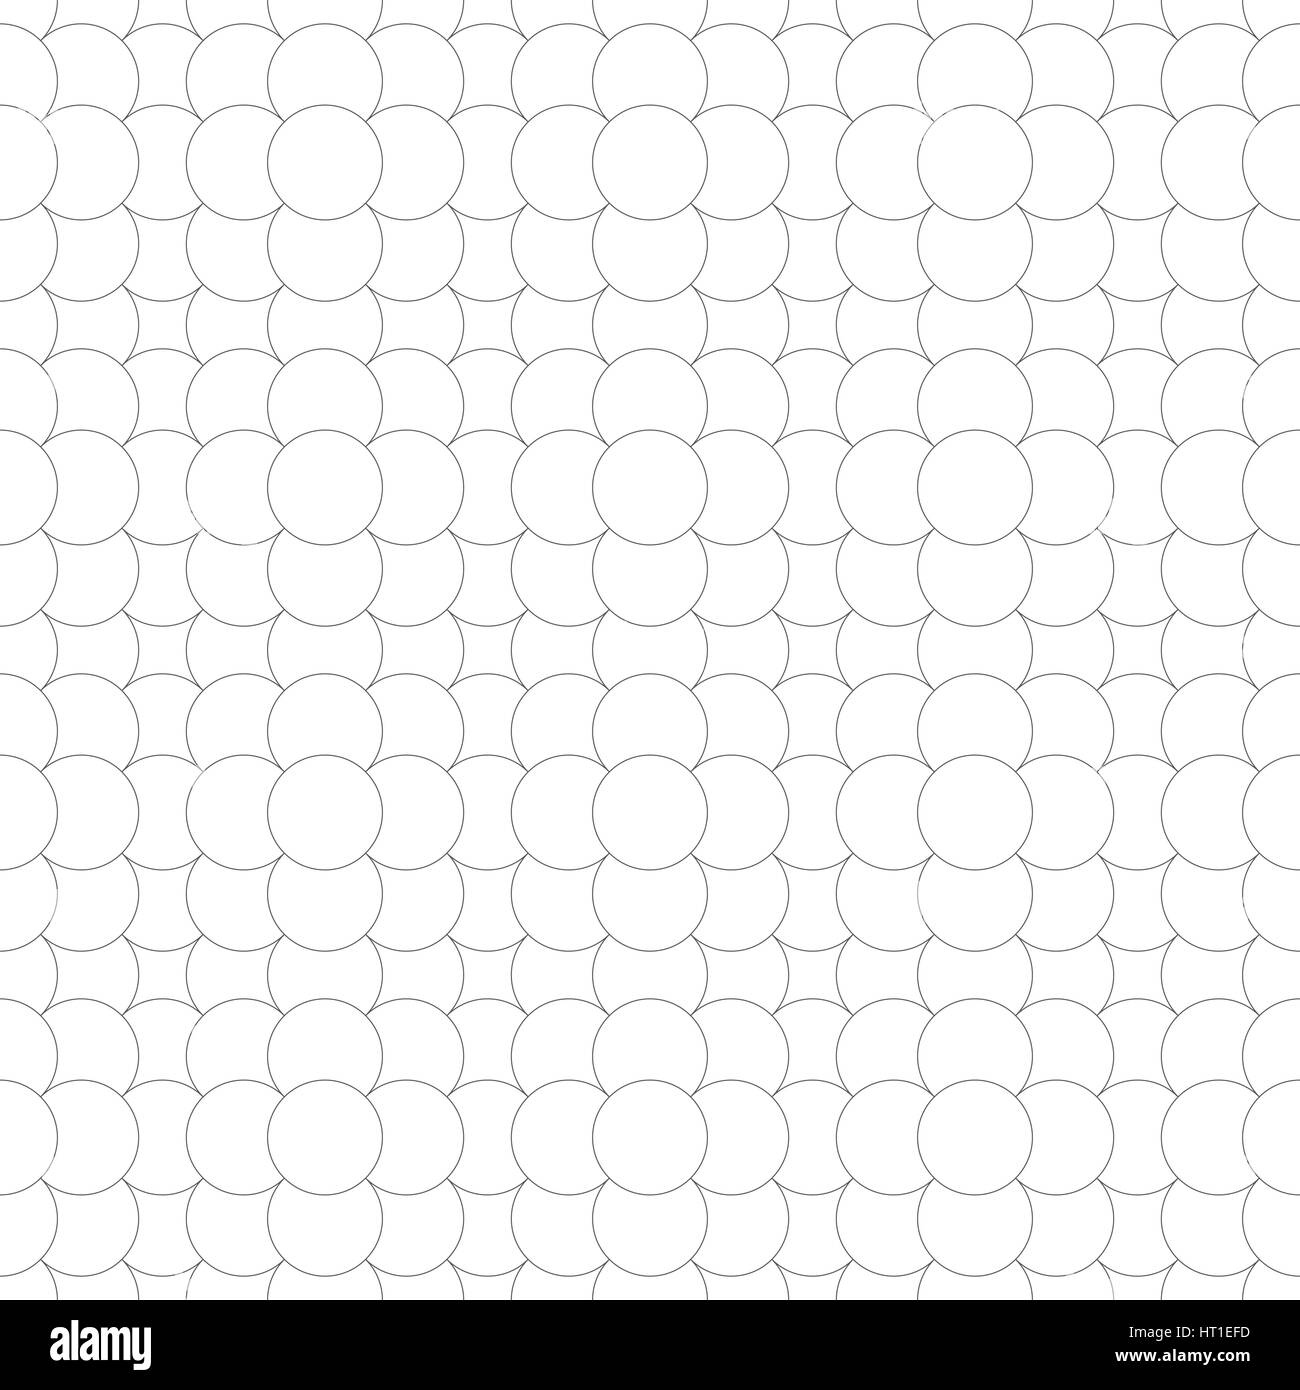 Seamless pattern. Elementary texture. Regularly repeating geometrical elements, shapes, semicircles, arcs, scales, rhombuses. Monochrome. Backdrop. We Stock Vector